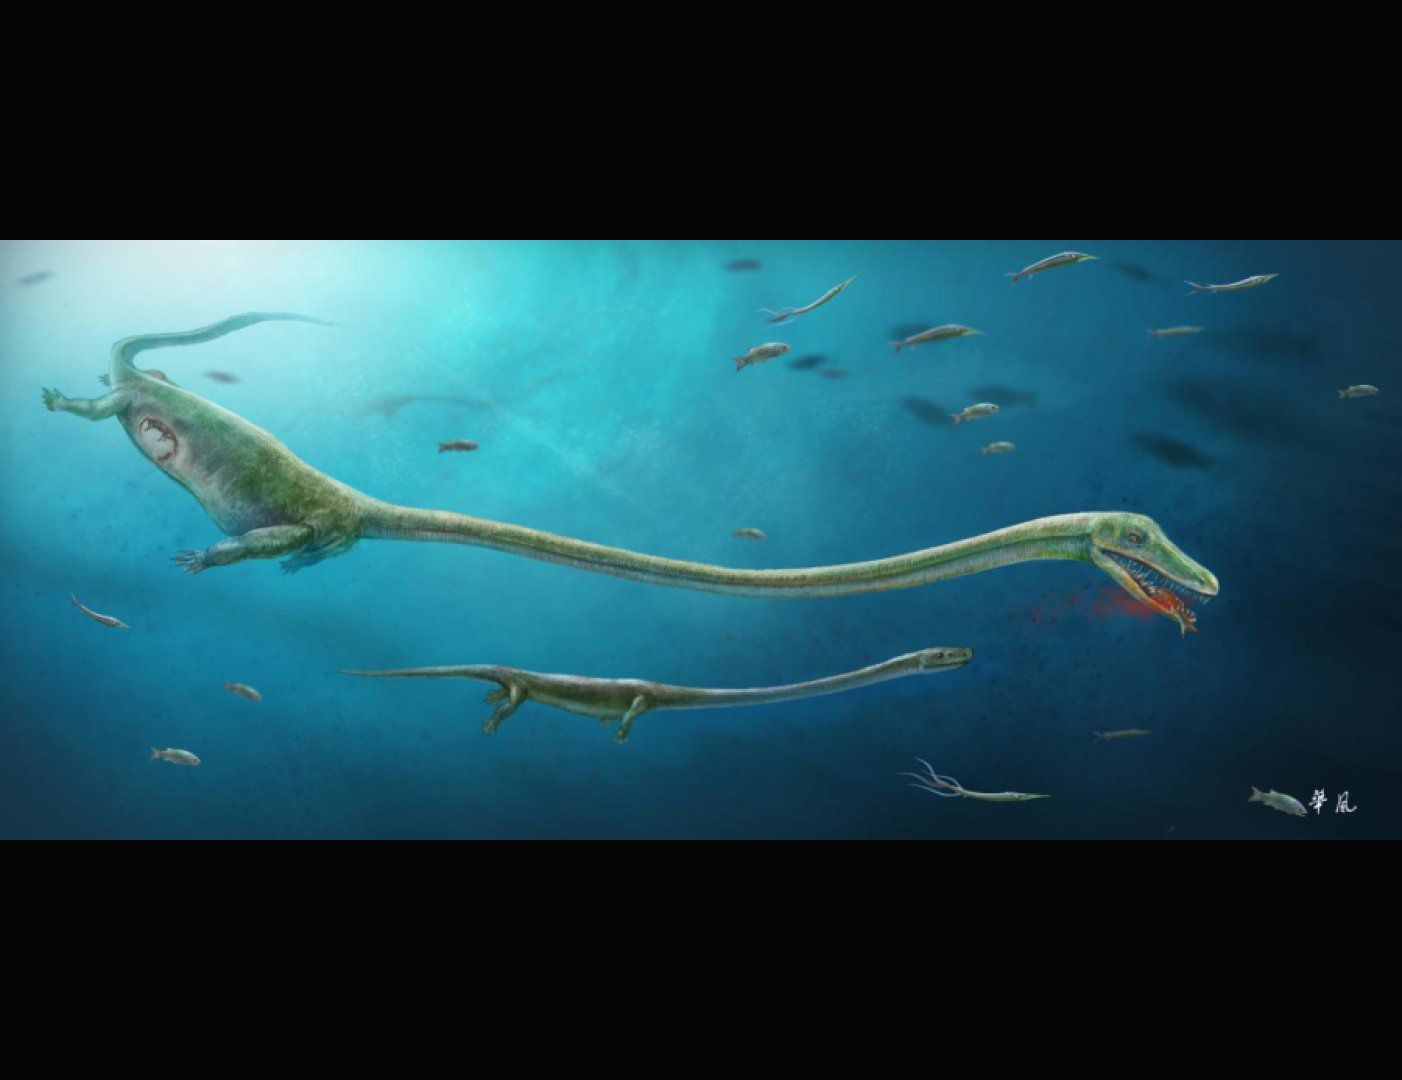 This Ancient Reptile Gave Birth to Live Offspring | Smart News| Smithsonian  Magazine